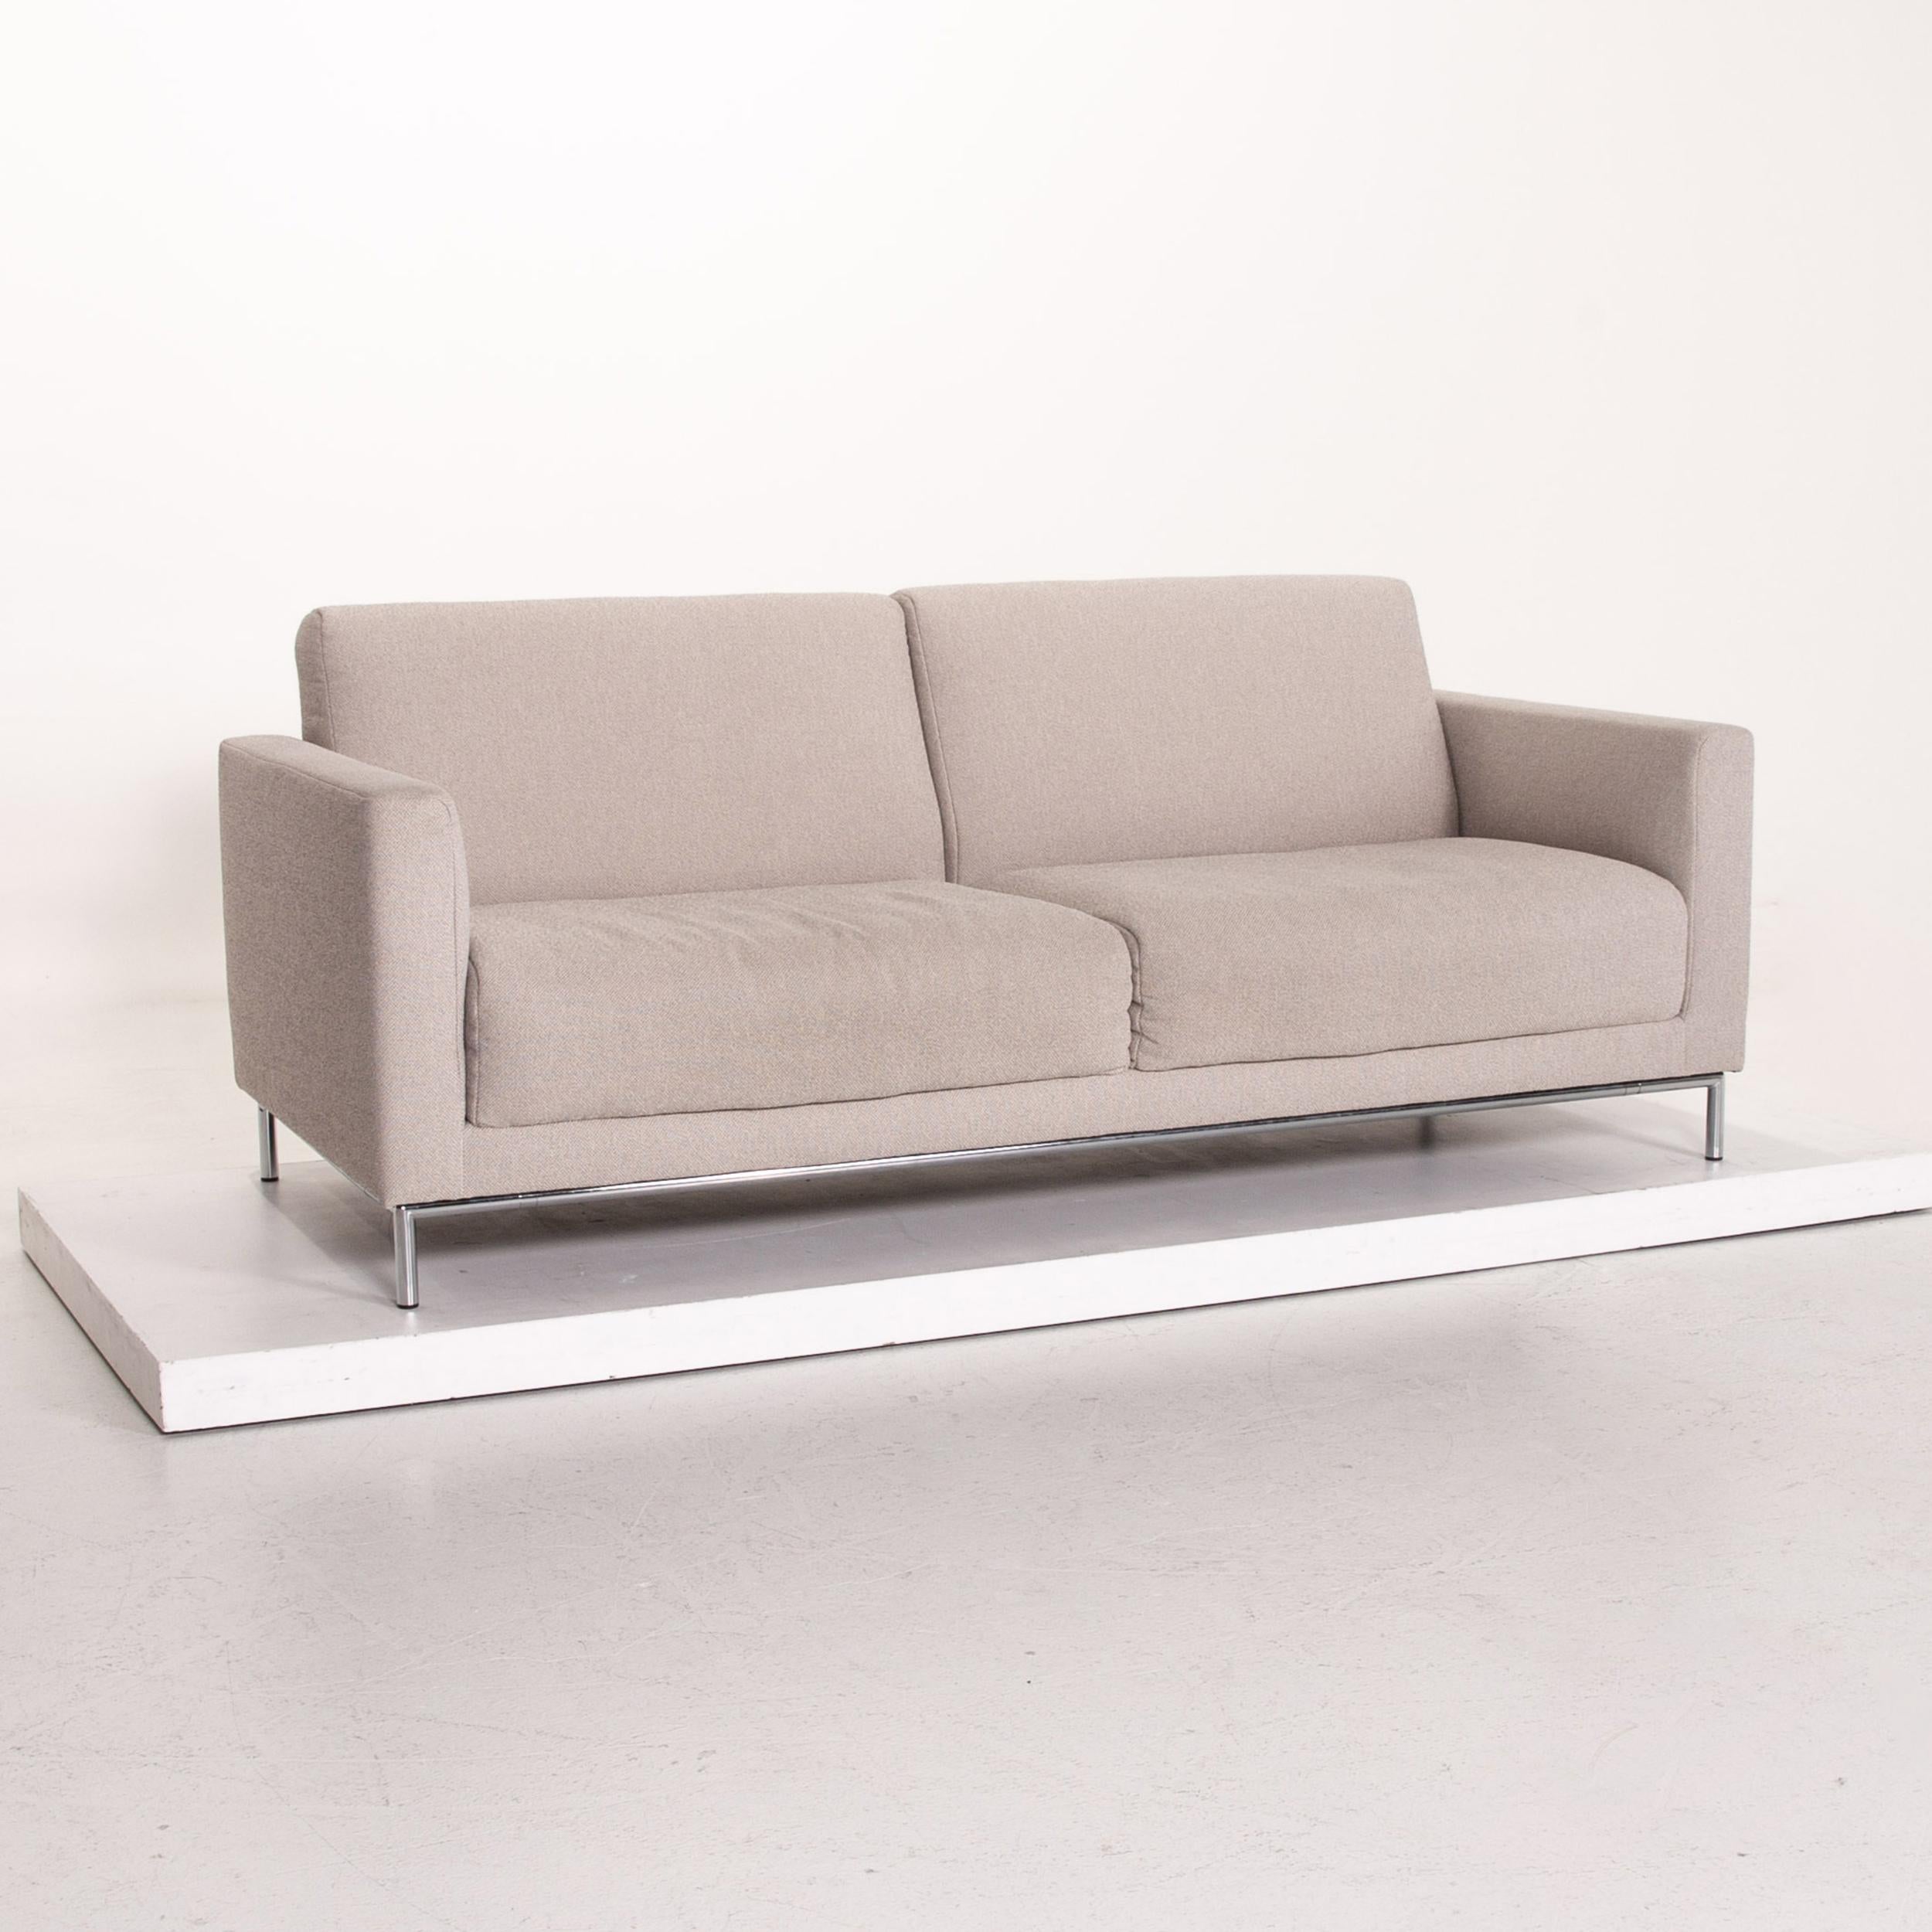 Rolf Benz Freistil 141 Fabric Sofa Gray Two-Seat Couch In Good Condition For Sale In Cologne, DE